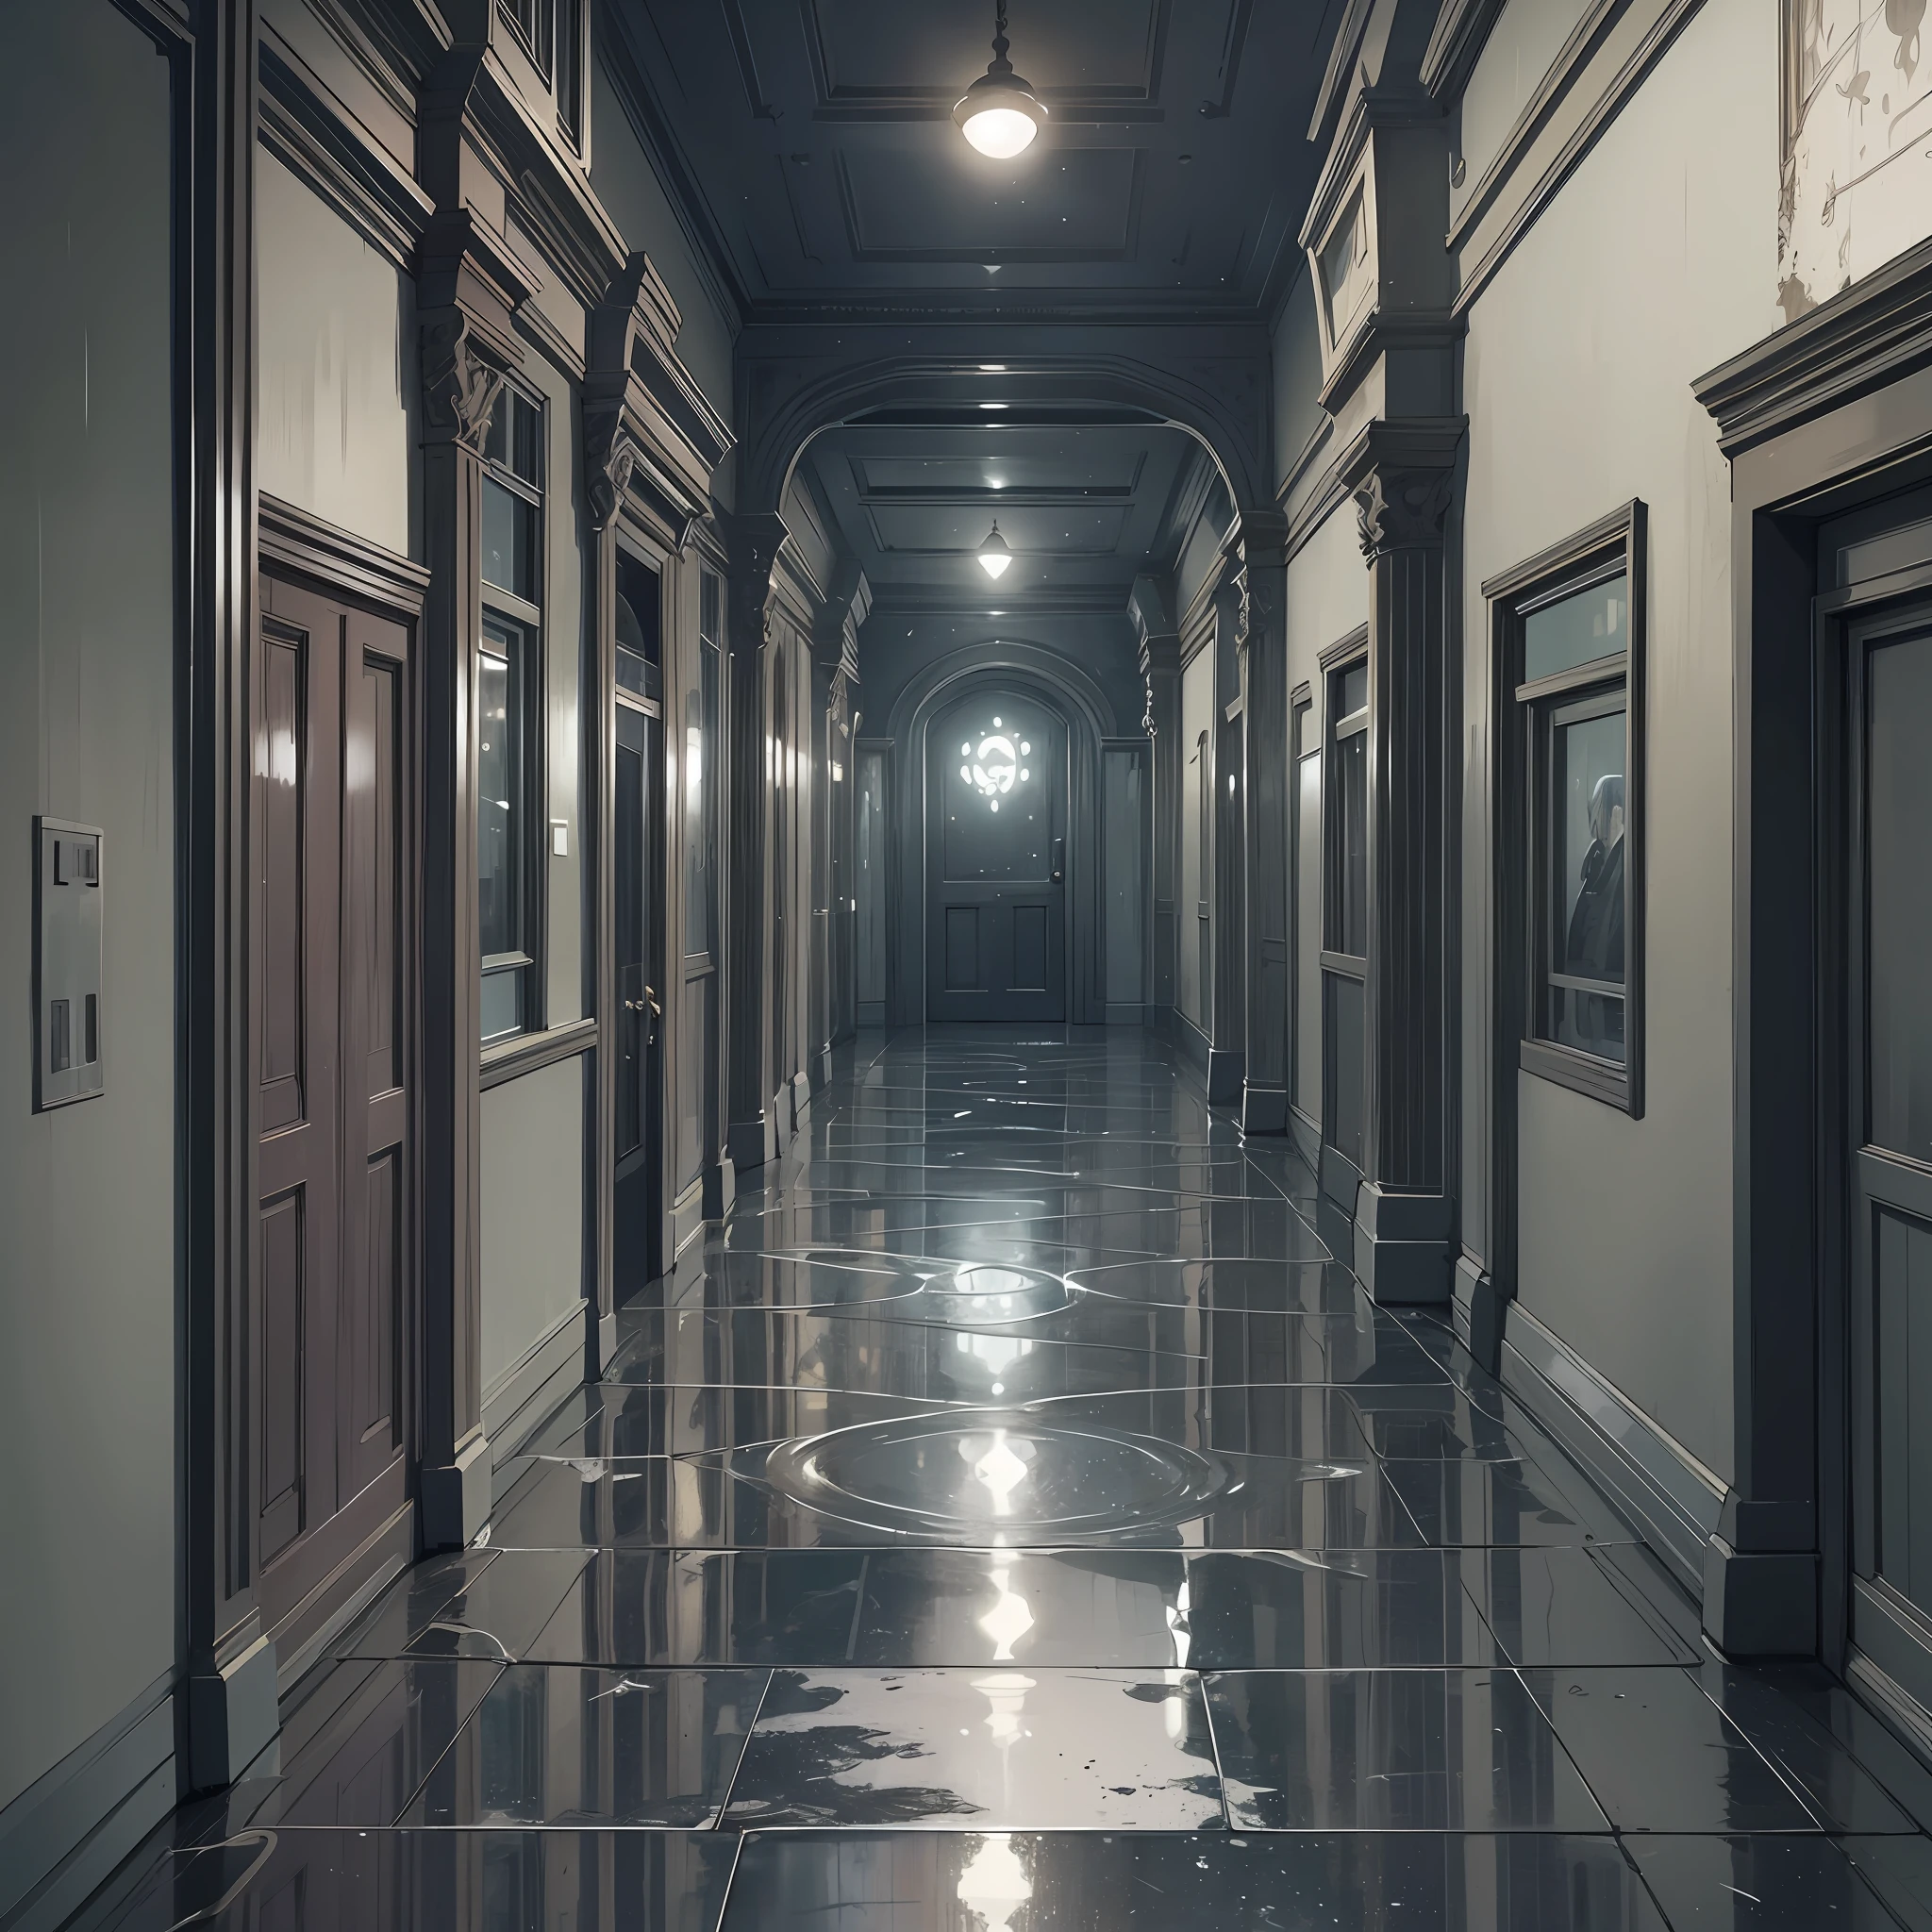 Create a realistic  and nostalgic image that encapsulates the essence of the Resident Evil gamefranchise across multiple generations.  Transport viewers into the world of Resident Evil with an atmospheric depiction that evokes a sense of nostalgia for long-time fans. Incorporate iconic elements such as the Umbrella Corporation logo, characters from different eras, and recognizable locations from the series. Employ detailed and immersive artwork to capture the realism of the franchise's universe. Let the image tell a story that draws viewers into the gripping narratives and dark ambiance of Resident Evil throughout its history --auto --s2